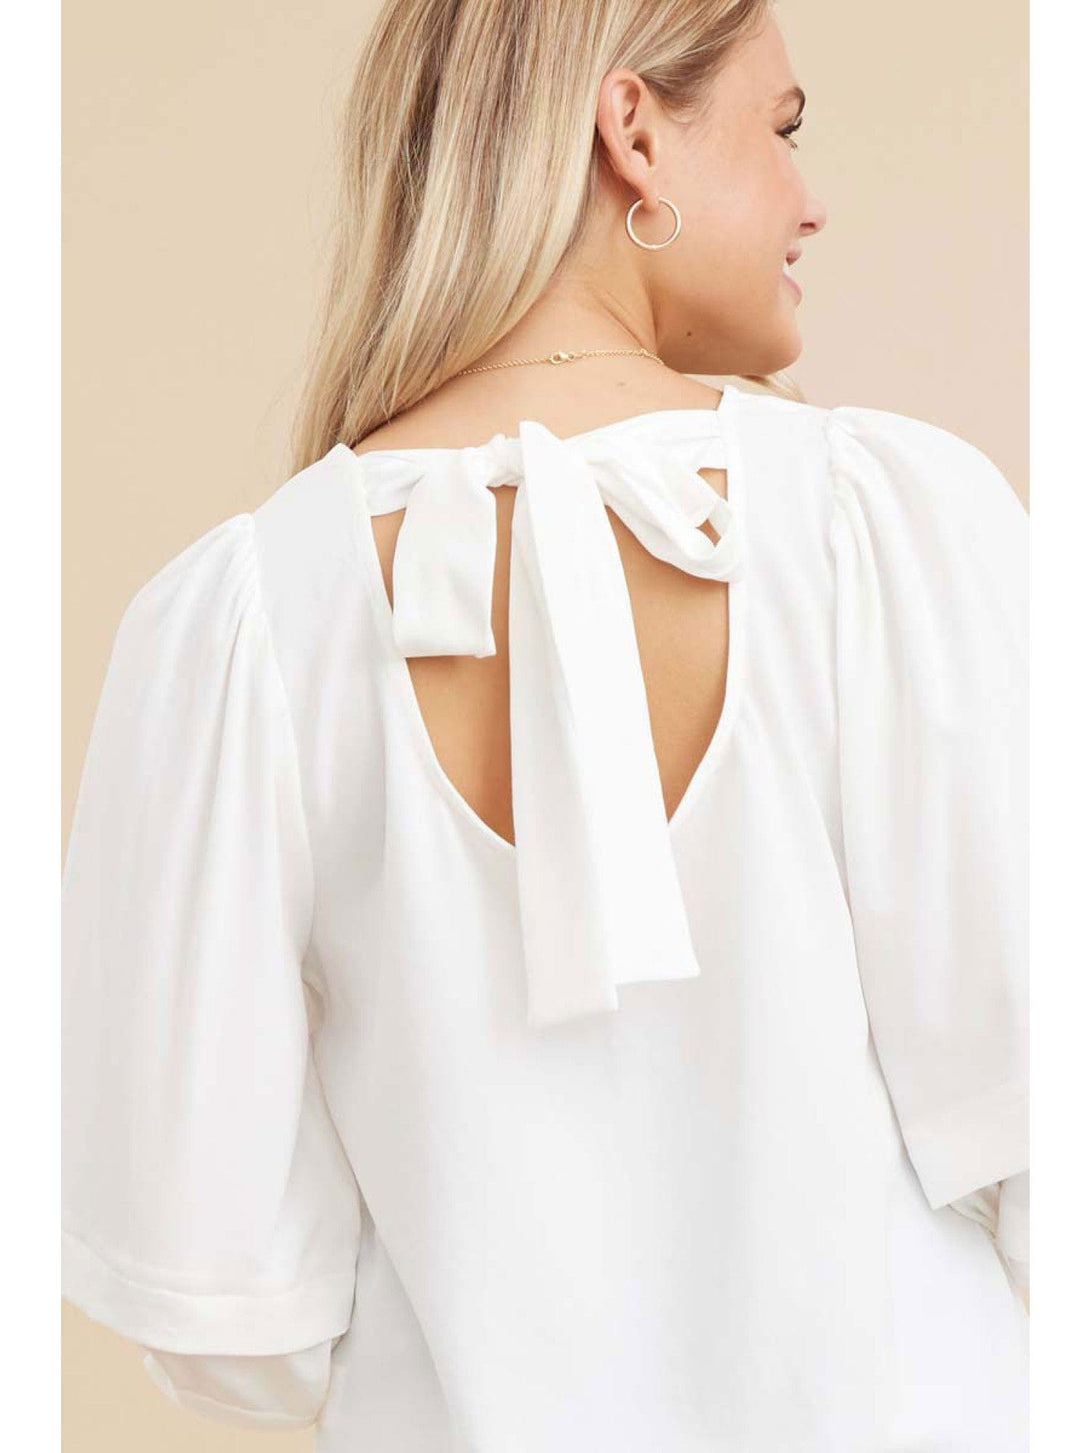 Jodifl Solid U-Neck Top with Back Ribbon-Tie Closure and Layered Cuffs